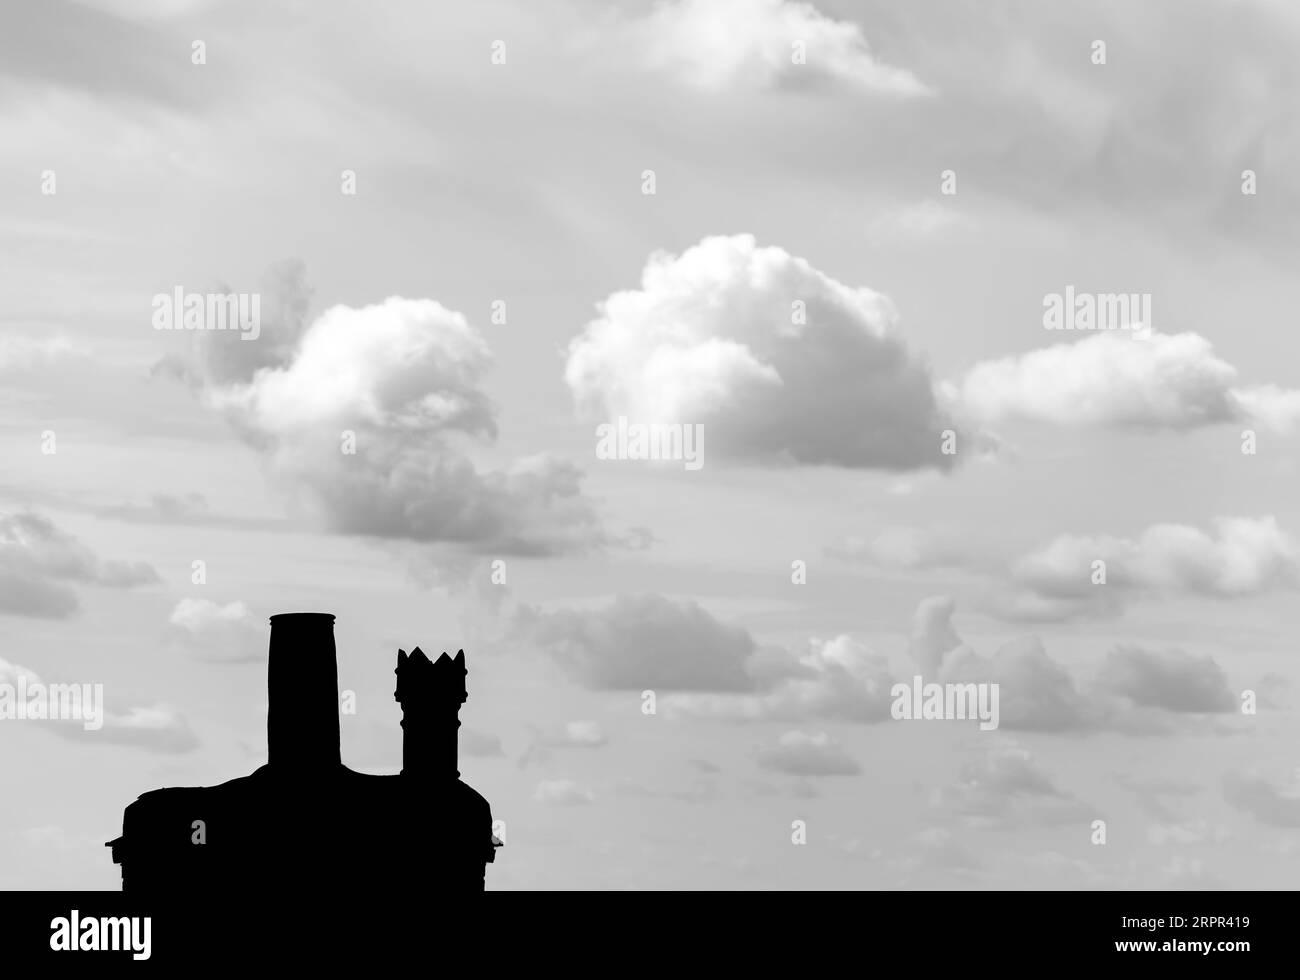 Chimney silhouette against grey sky, Lincolnshire, England, uk Stock Photo